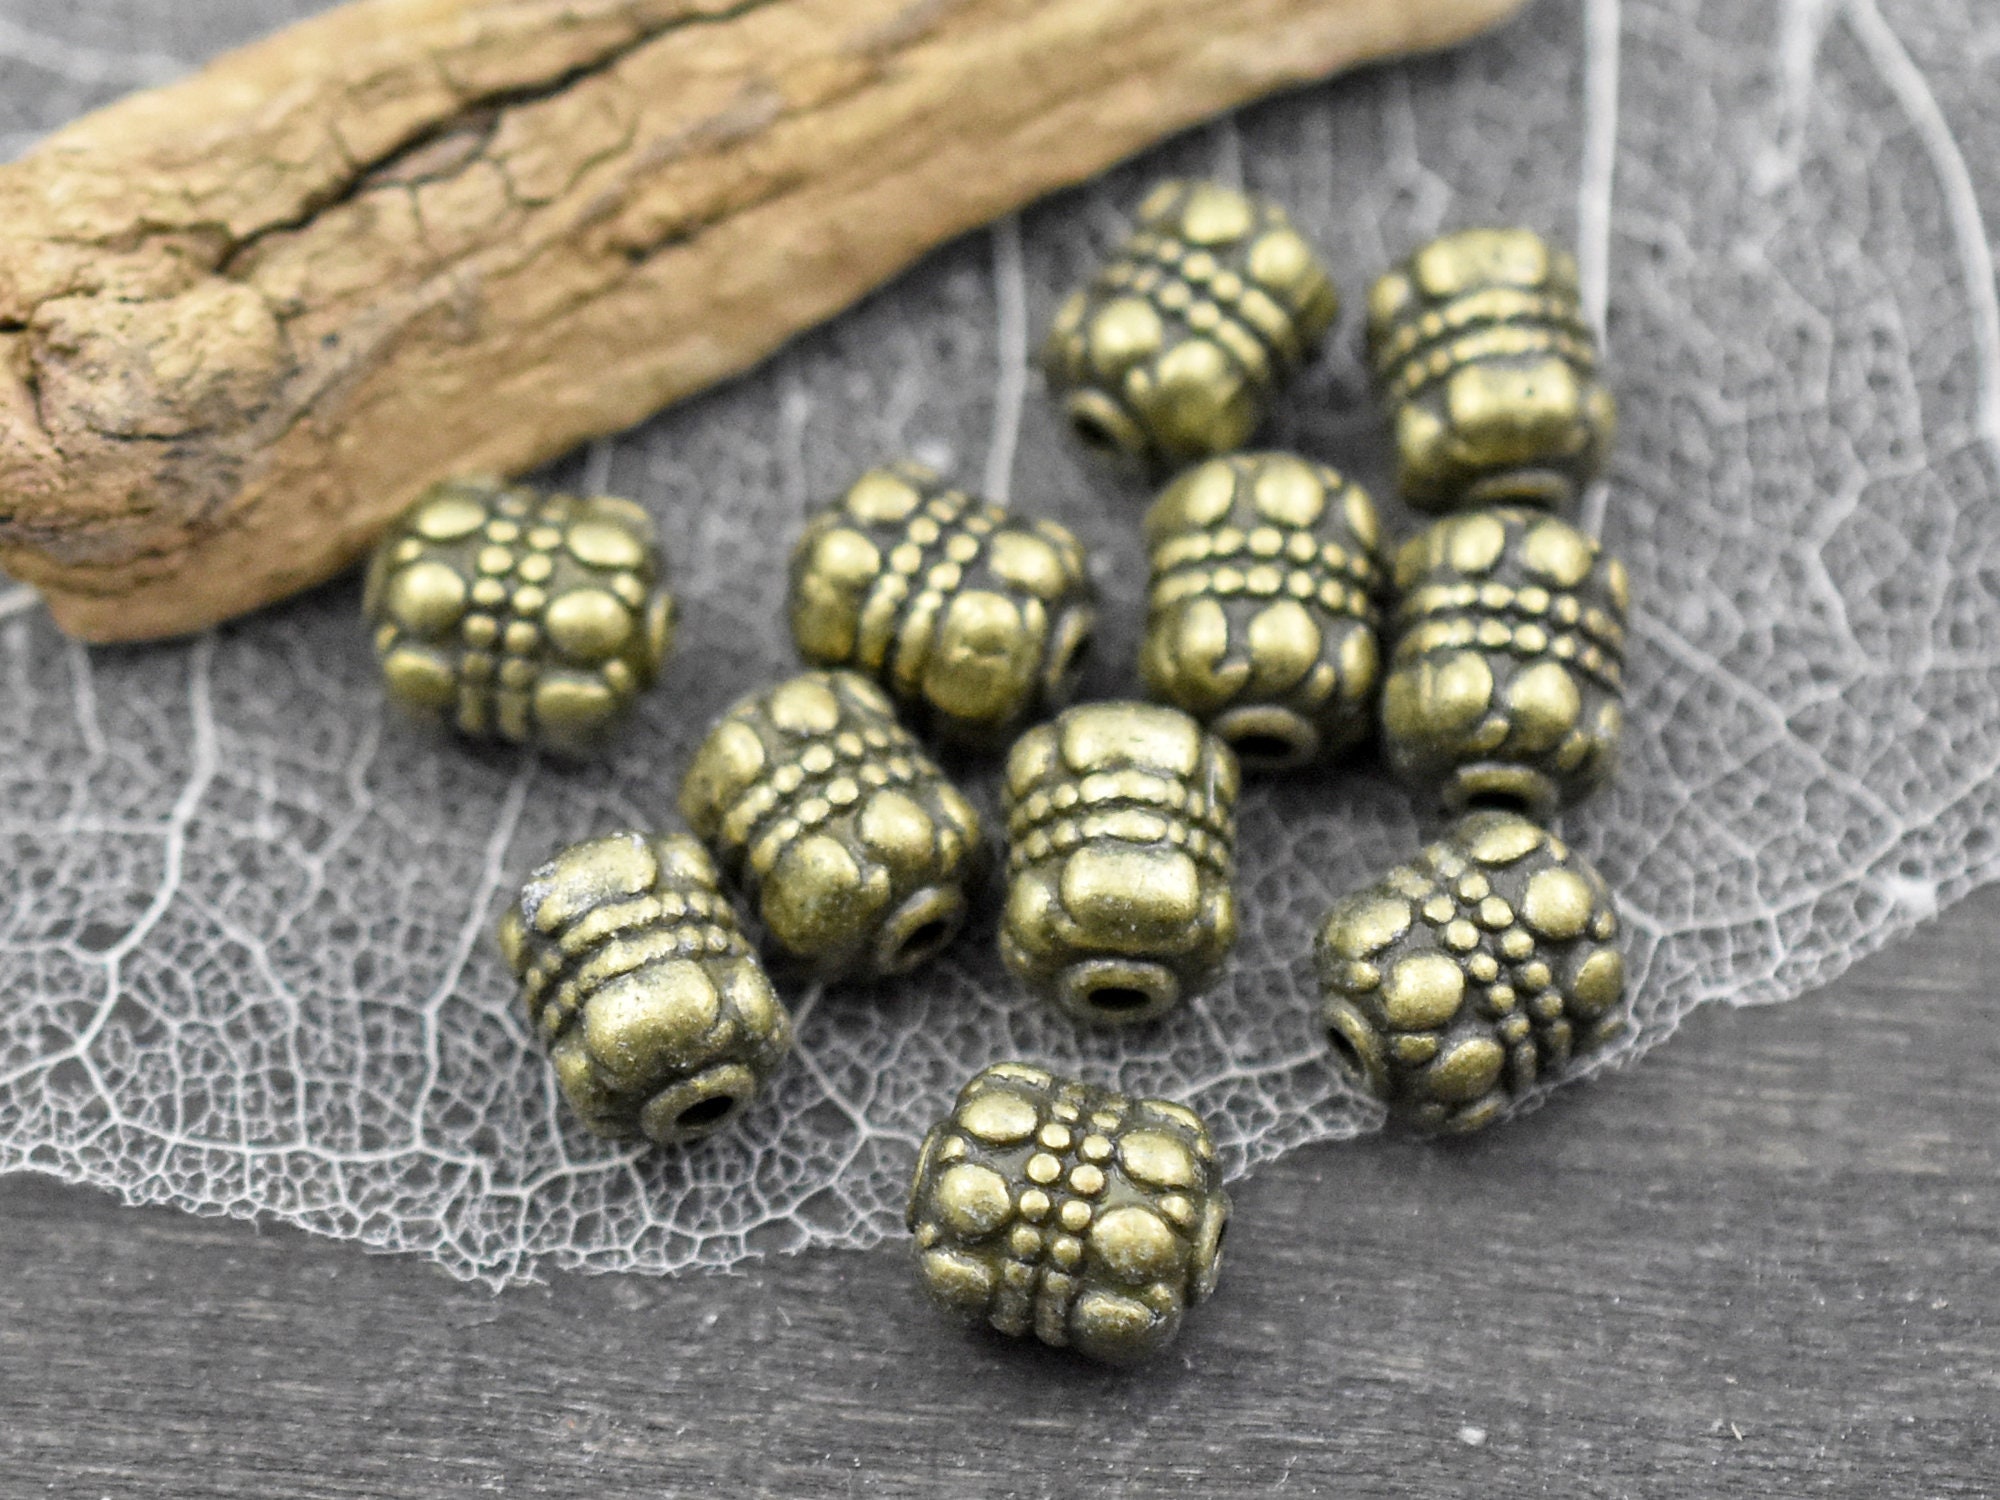 *10* 10mm Antique Silver Ornate Coin Spacer Beads Czech Glass Beads by GR8BEADS - The Bead Obsession